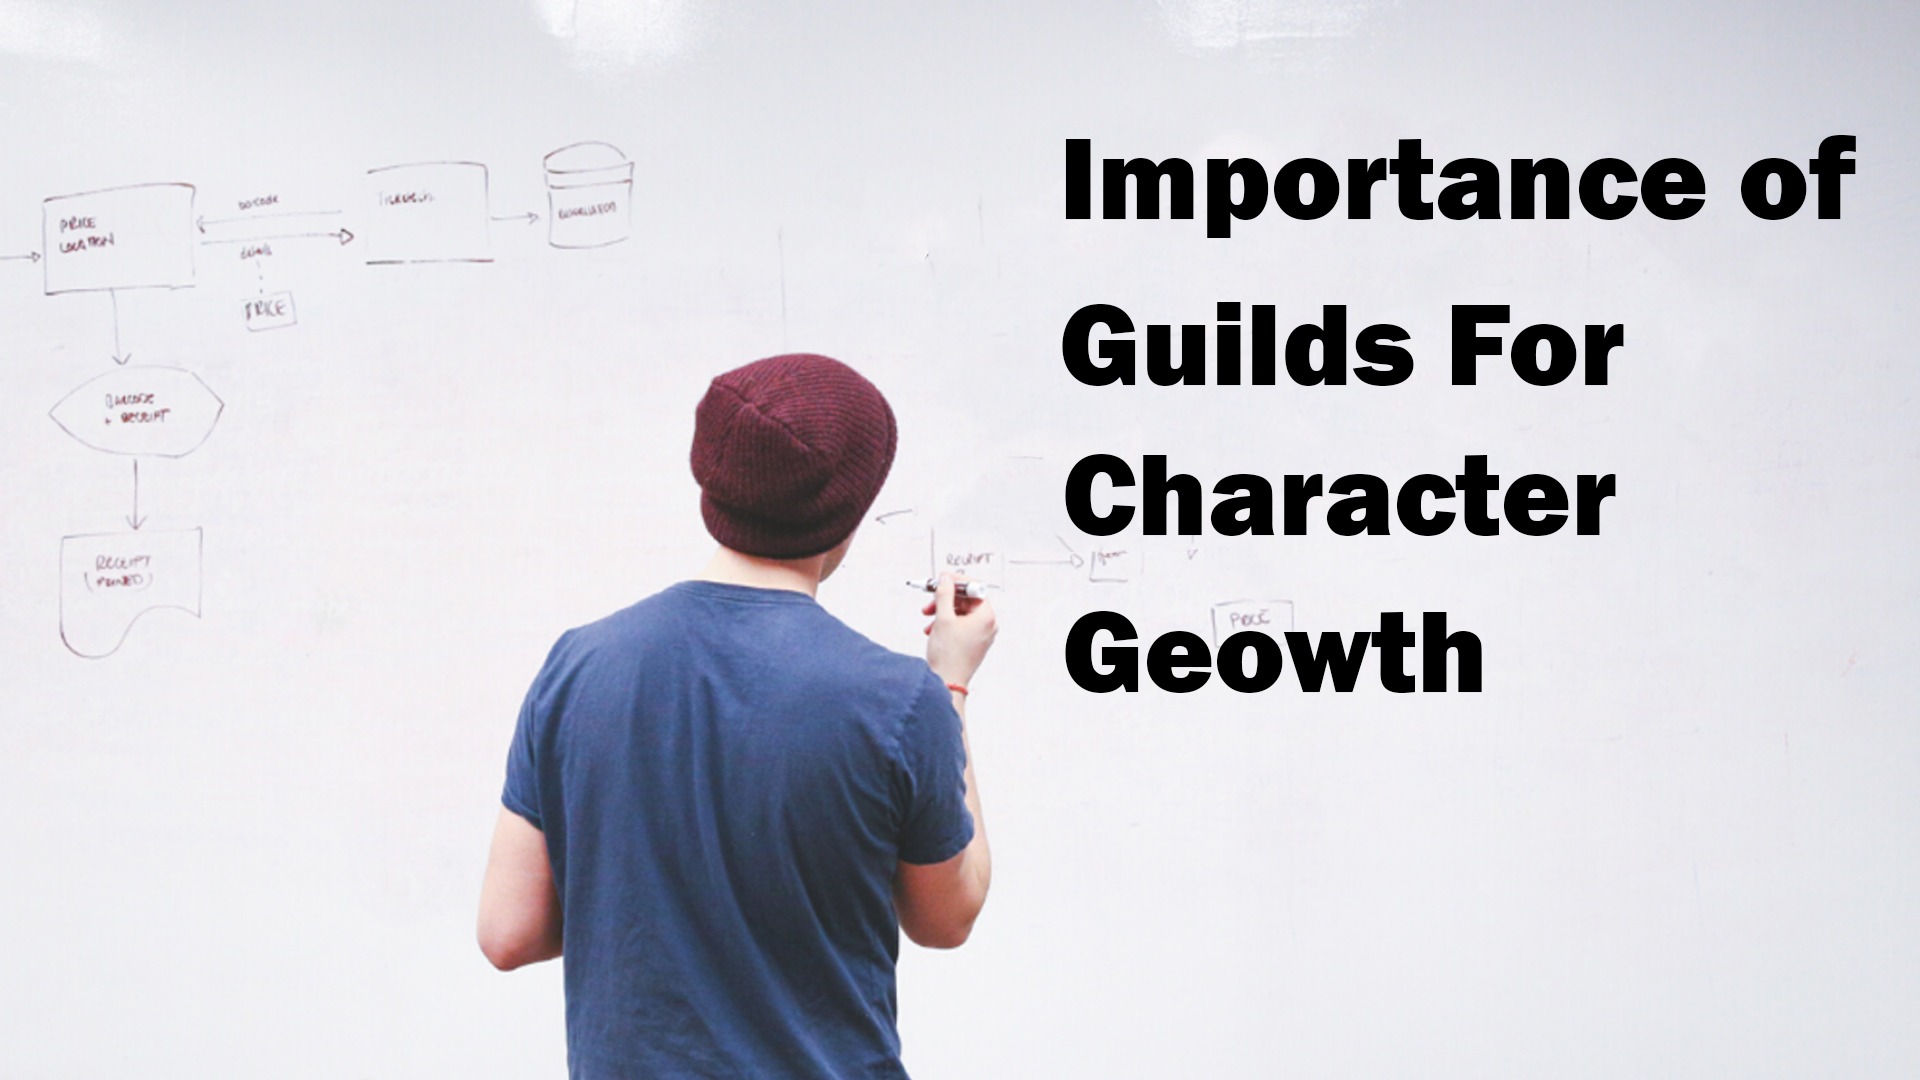 Importance of Guilds for Character Growth